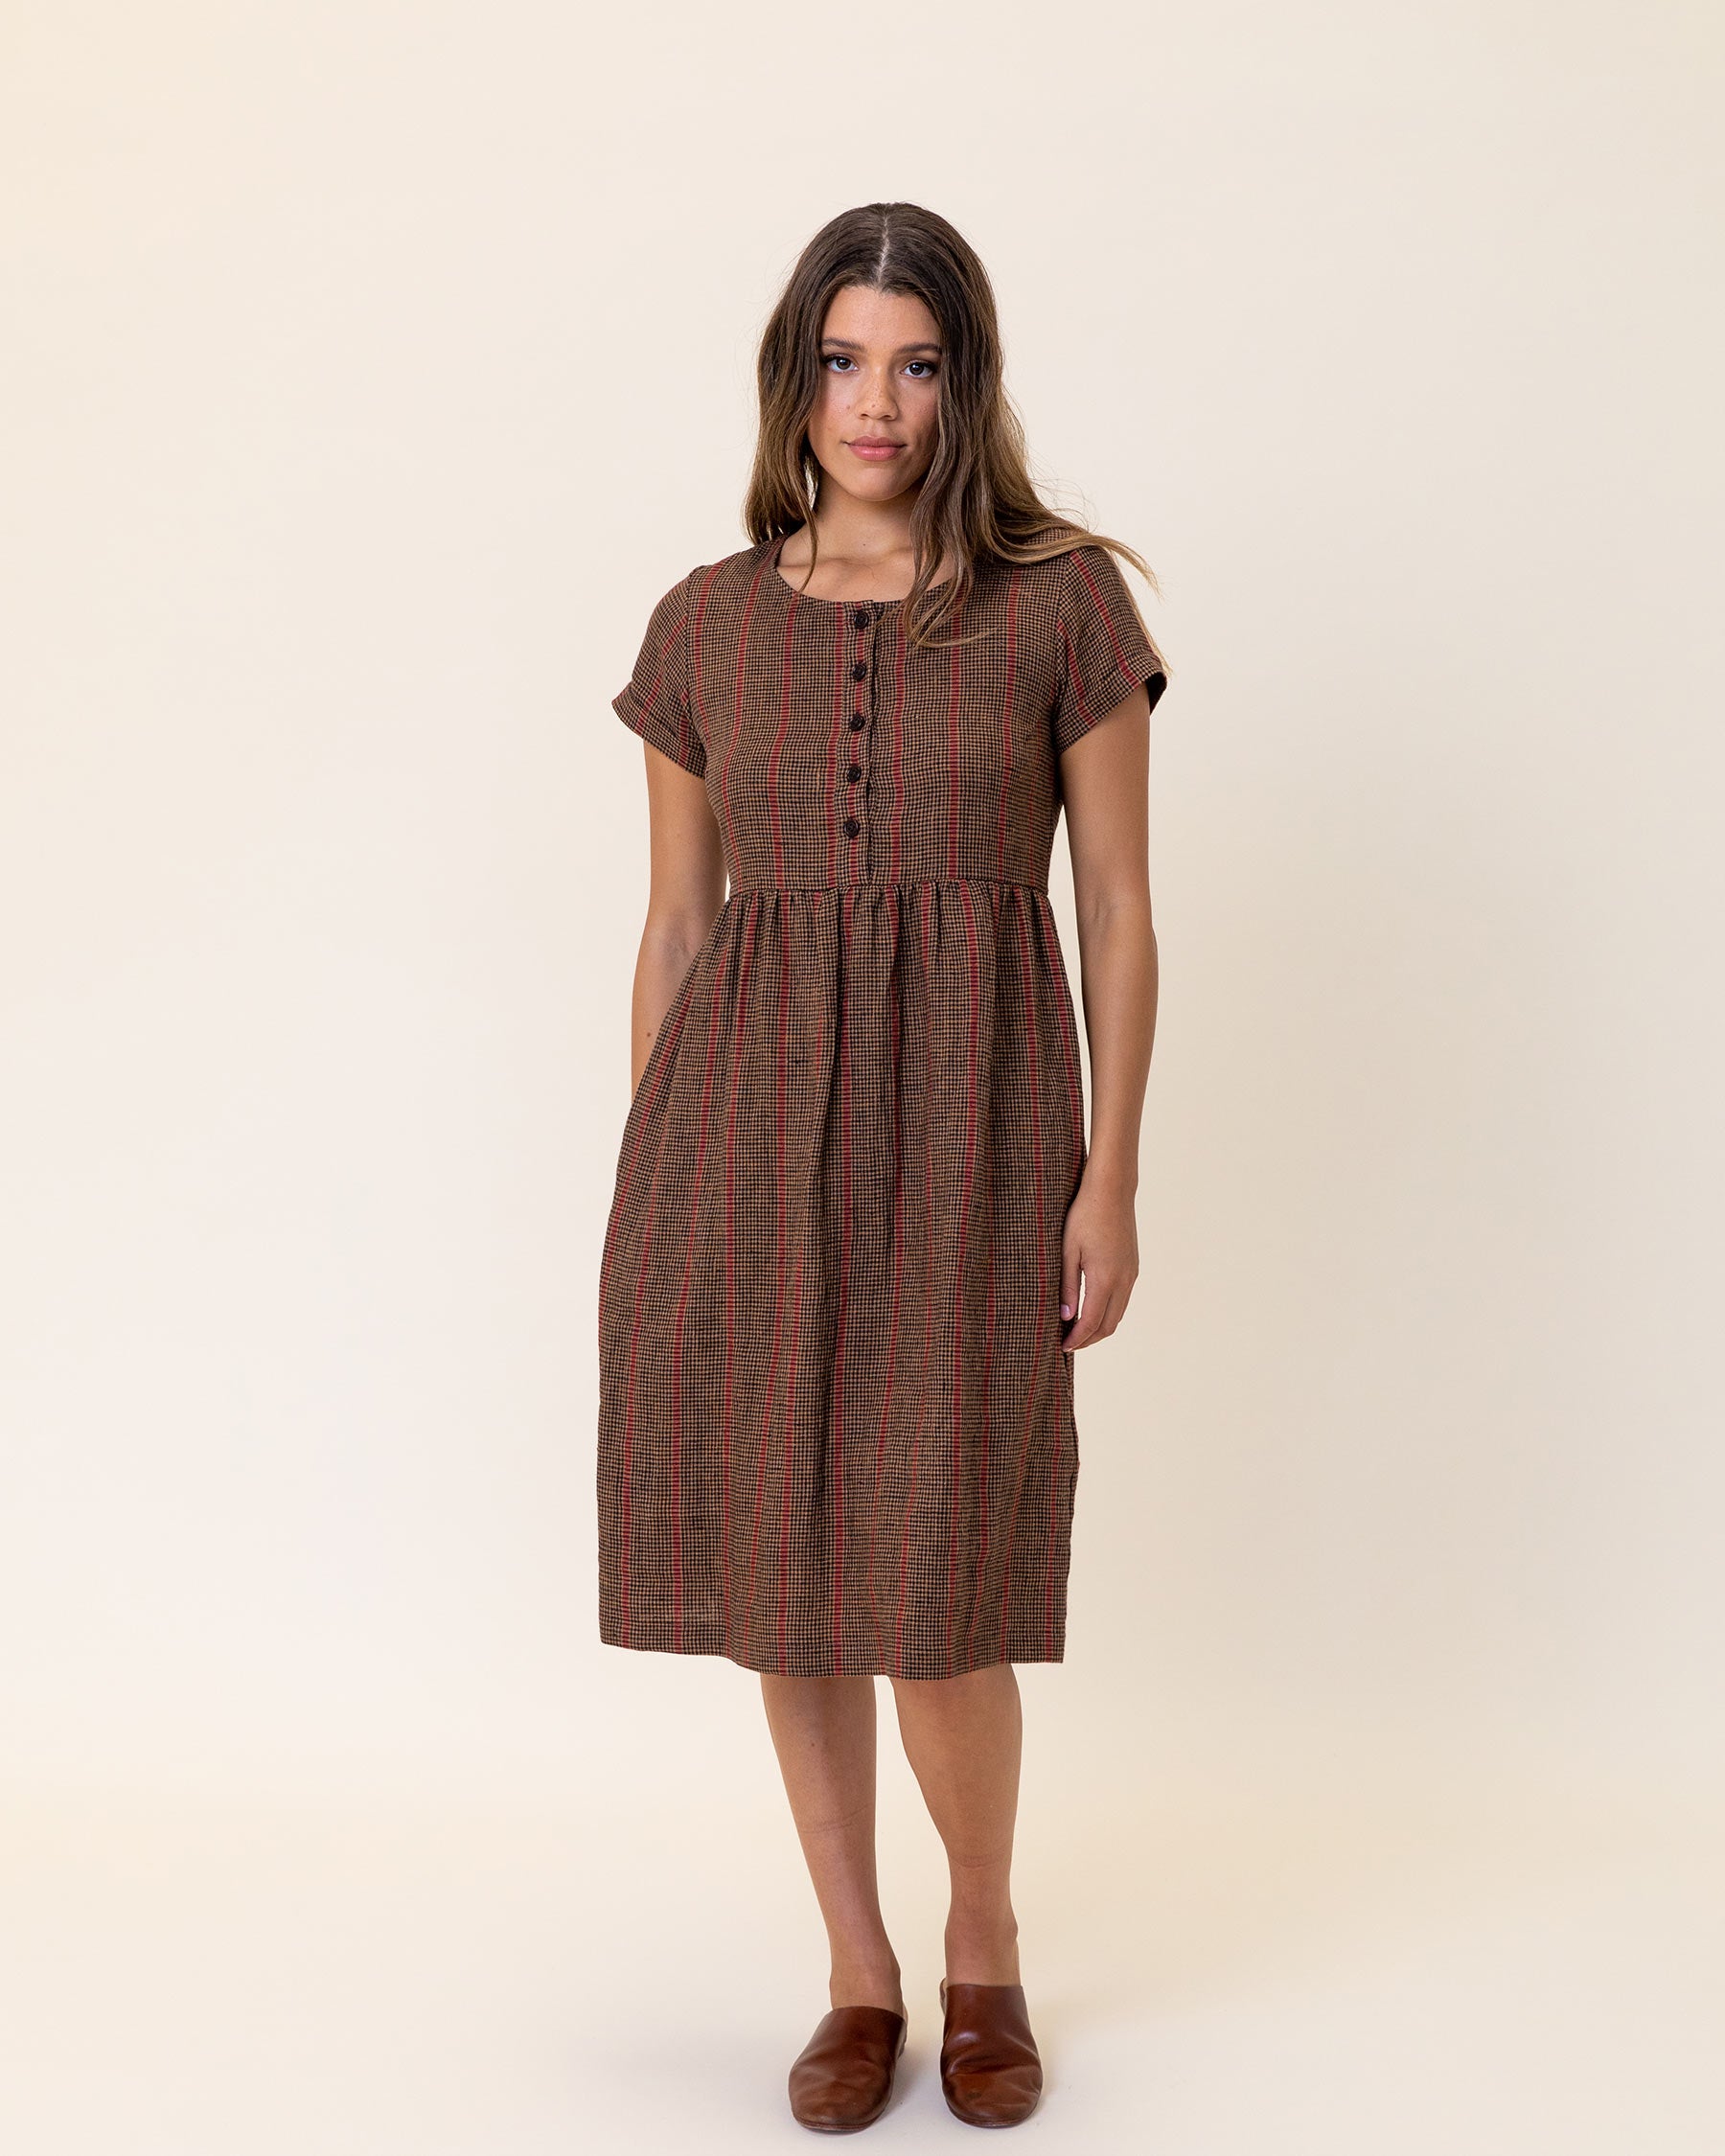 Timeless, Ethically Made Linen Dresses with Pockets